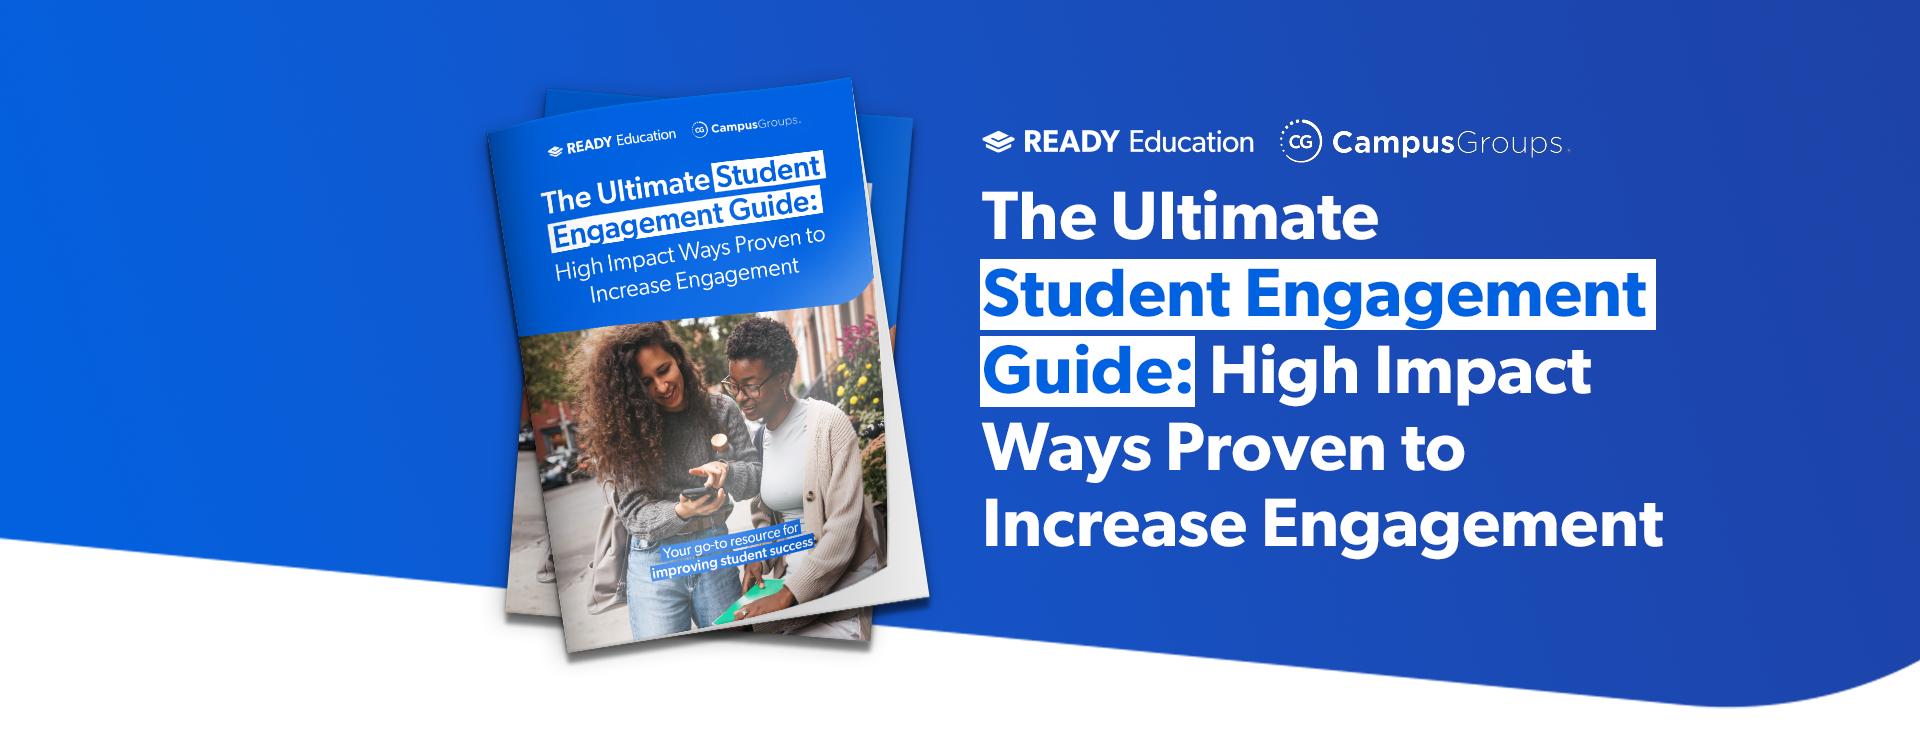 The Ultimate Student Engagement Guide: High Impact Ways Proven to Increase Engagement